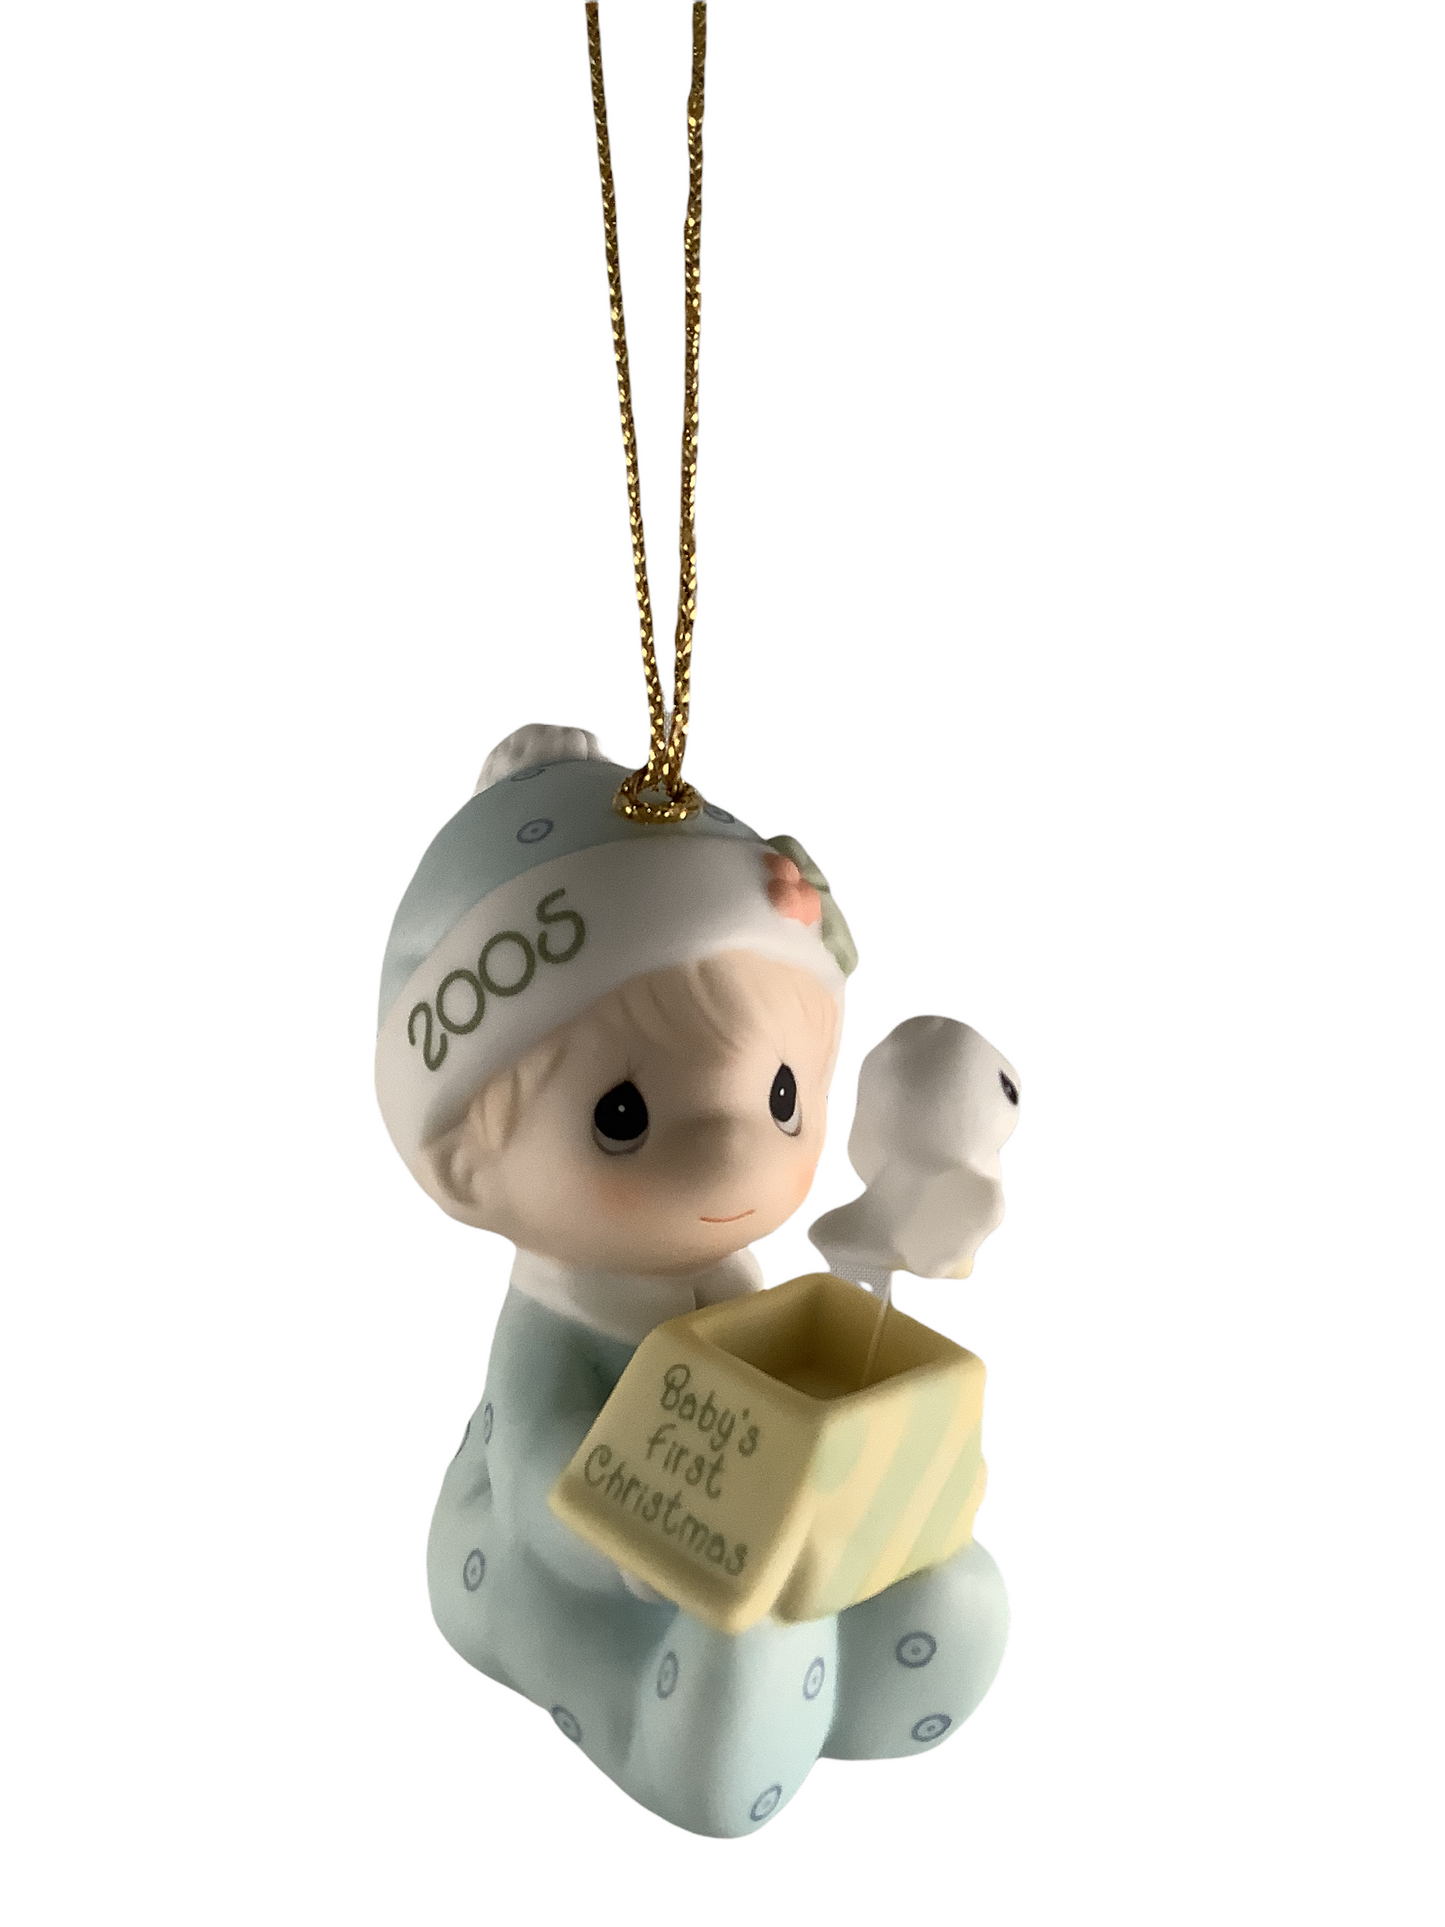 Baby's First Christmas 2005 (Boy) - Precious Moment Ornament